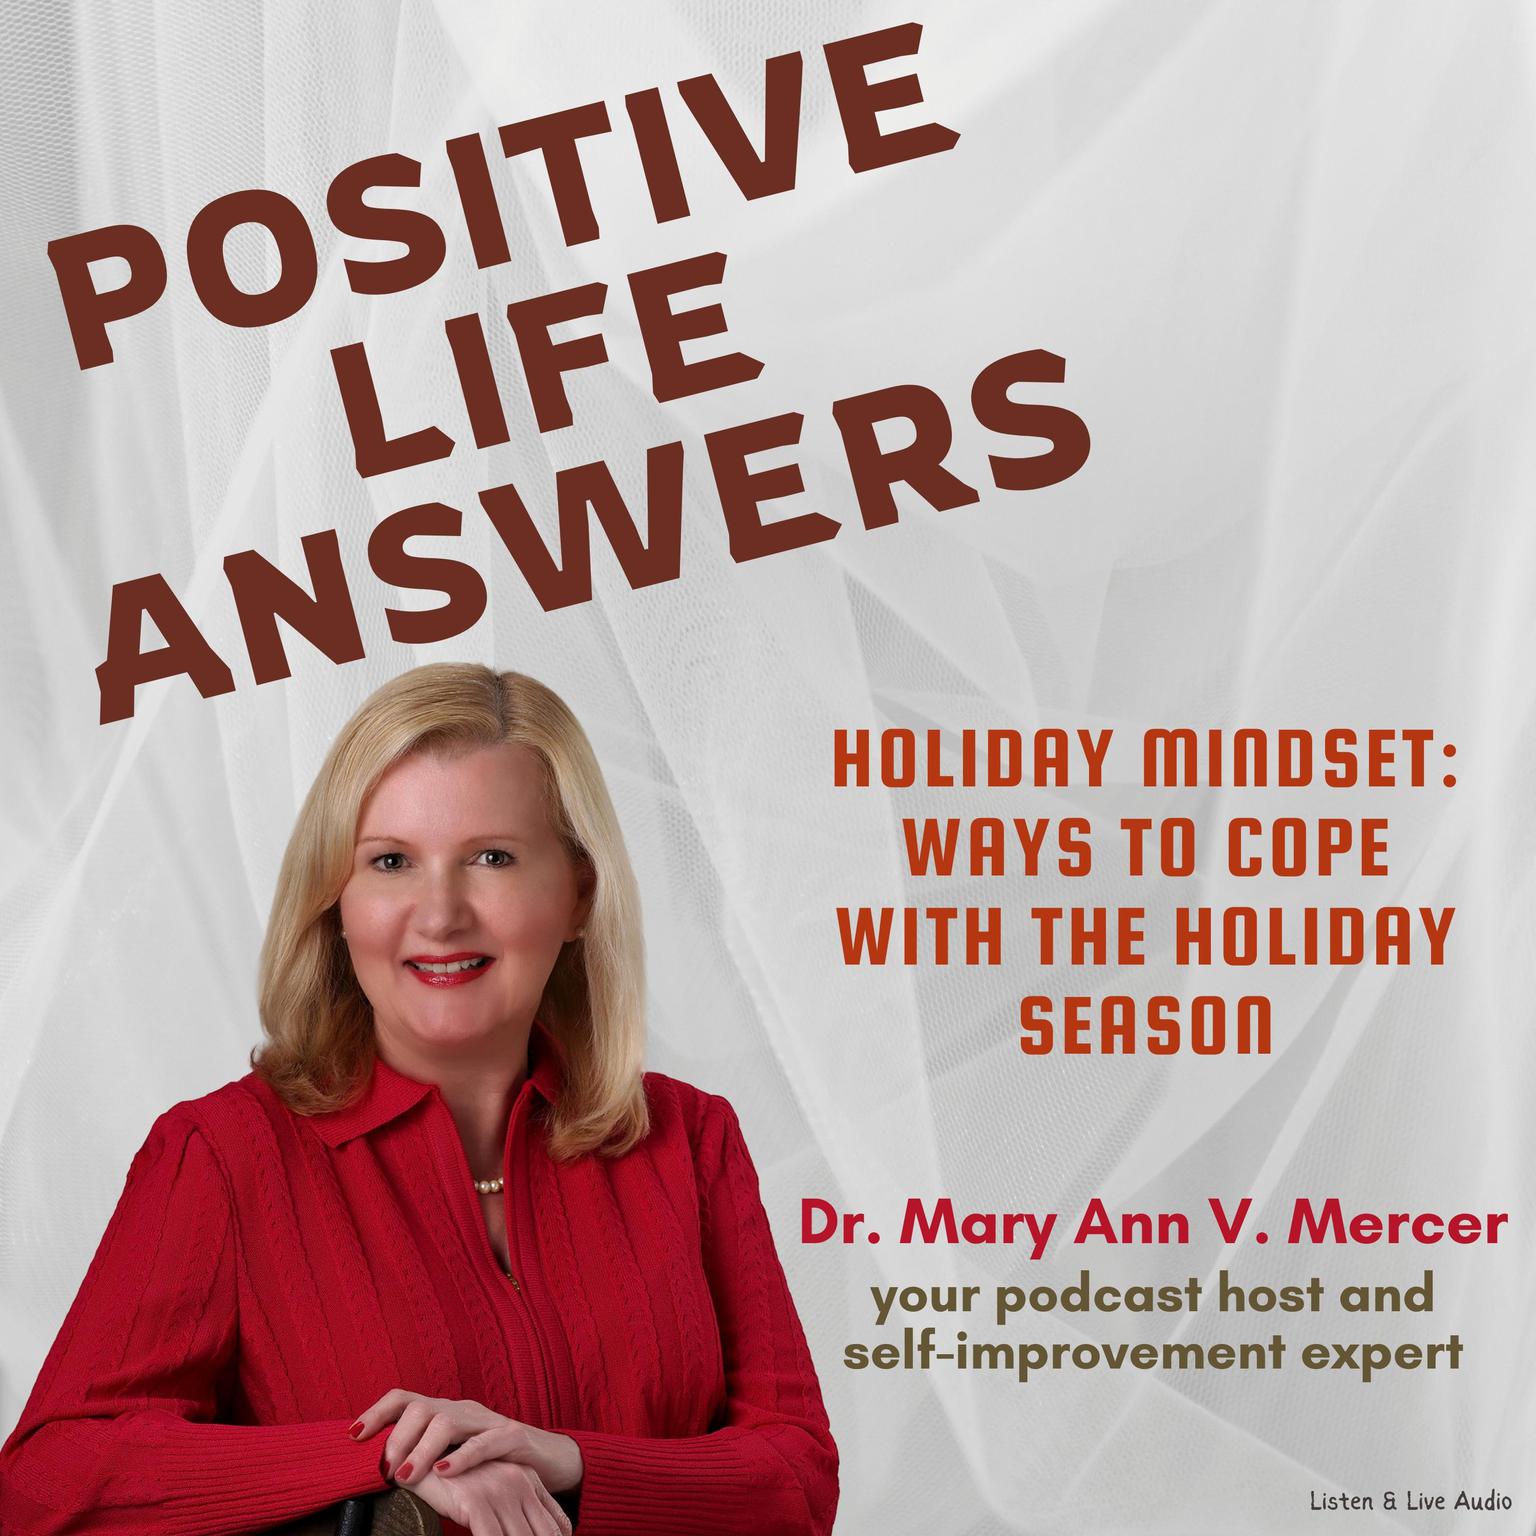 Positive Life Answers: Holiday Mindset - Ways To Cope With The Holiday Season Audiobook, by Michael Mercer